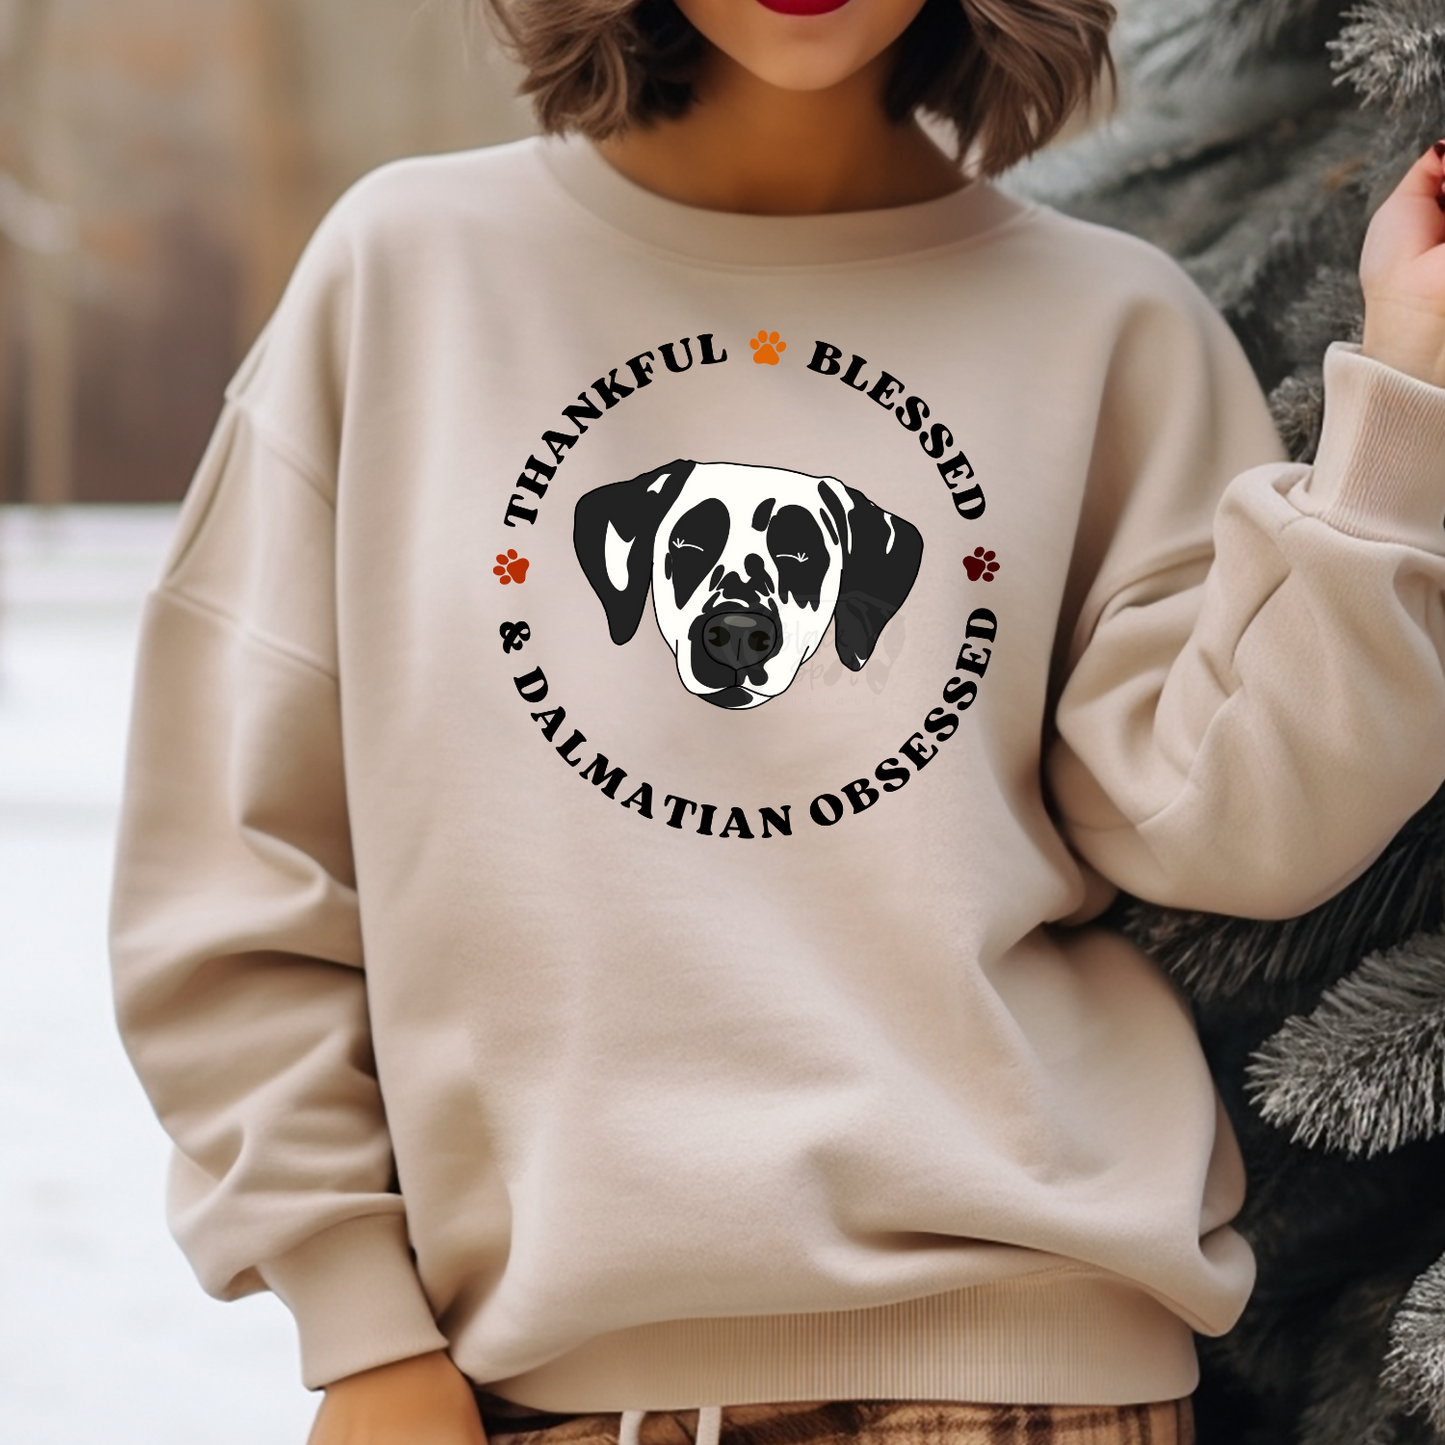 Thankful Blessed and Dalmatian Obsessed Crewneck Sweatshirt